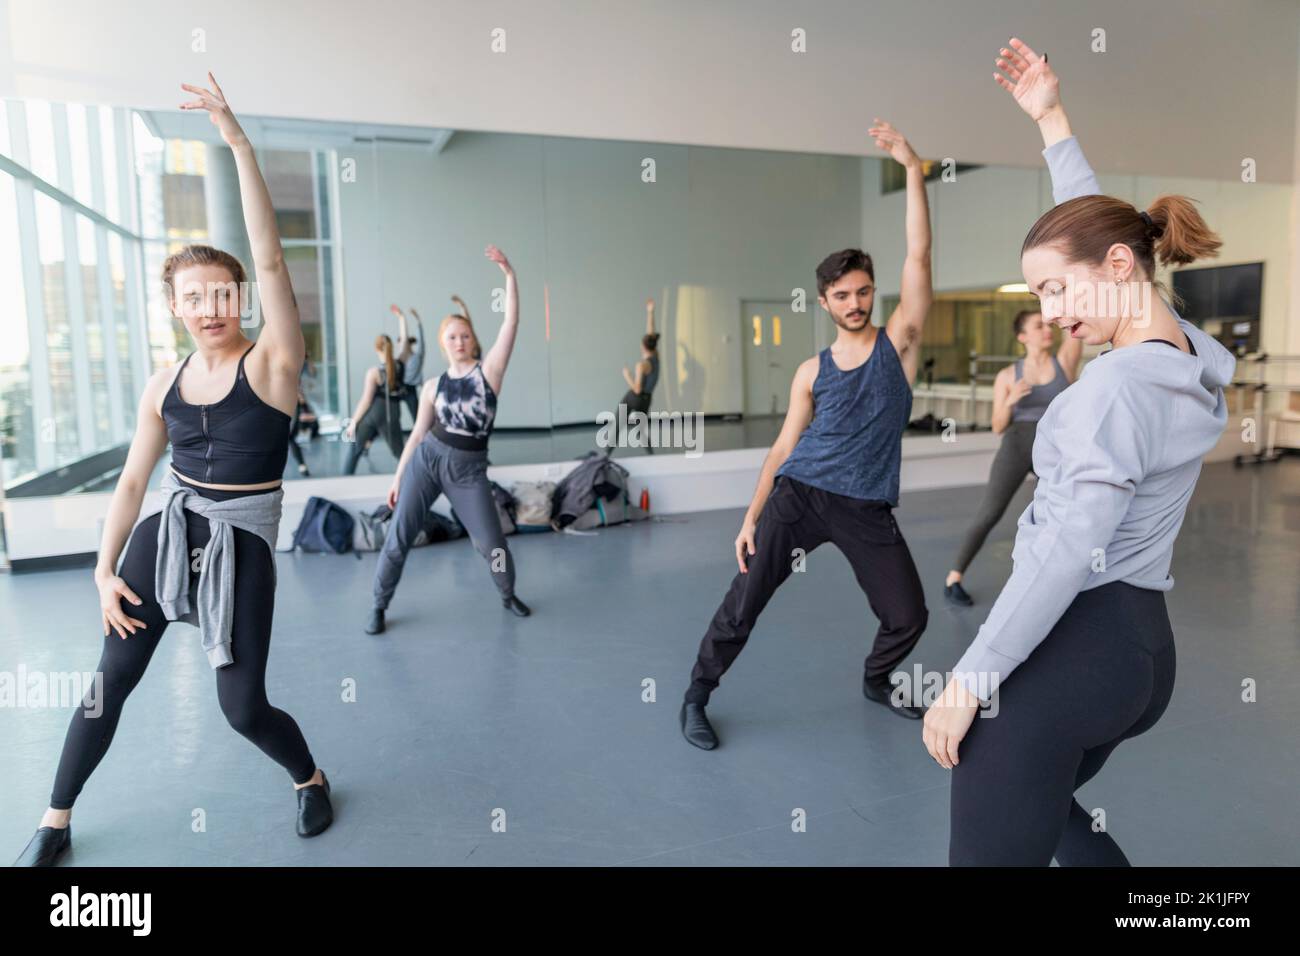 Instructor guiding dance students rehearsing in dance studio Stock Photo